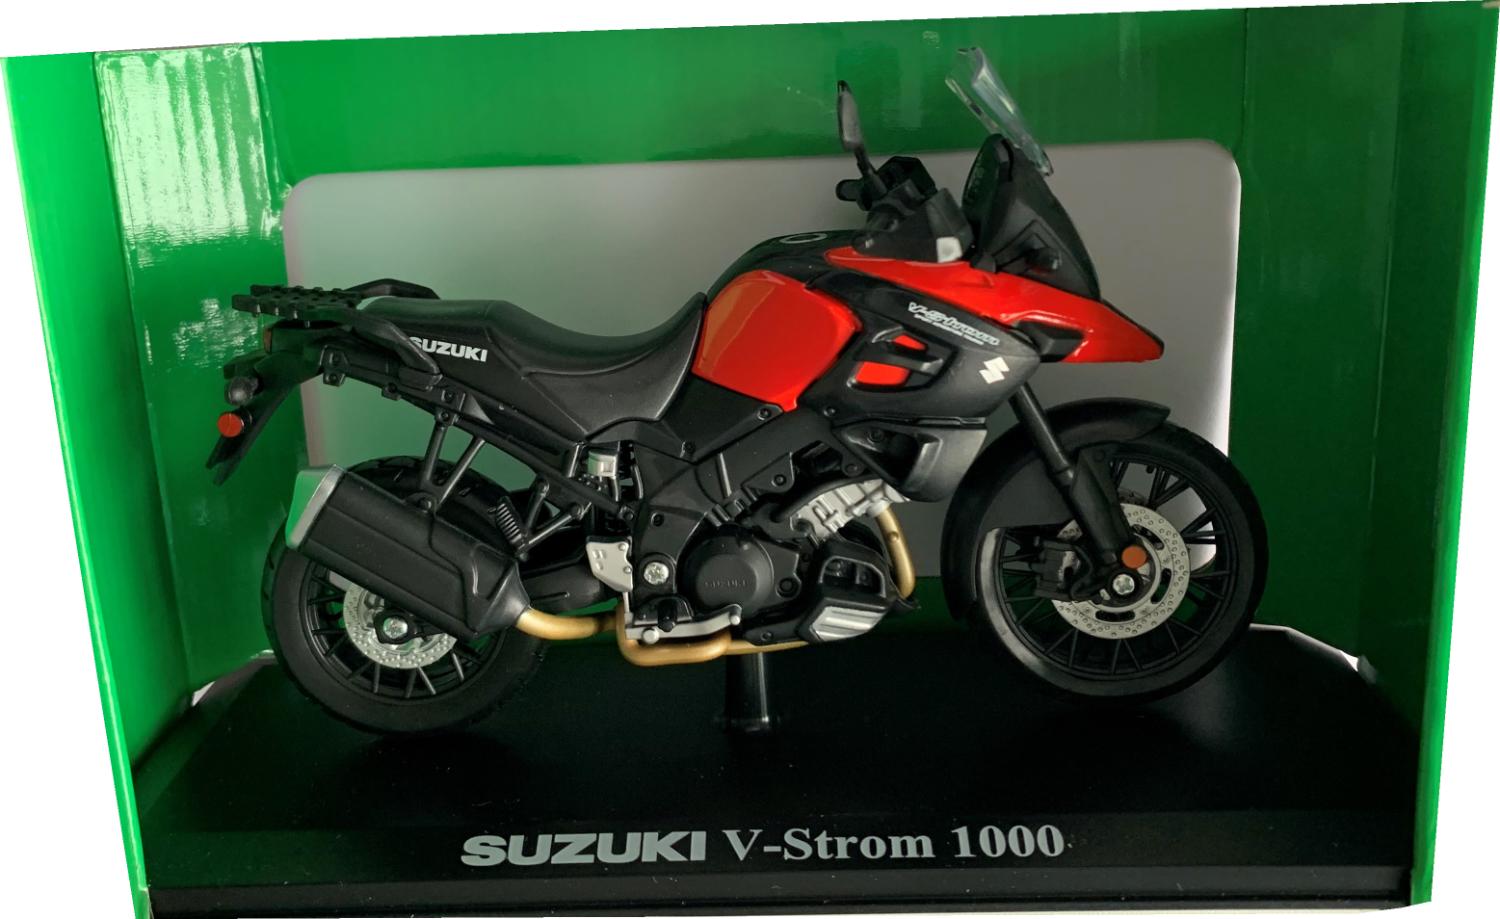 Suzuki V-Strom 1000 in red / black 1:12 scale model from Maisto, mounted on a plinth and presented in a green Suzuki themed box